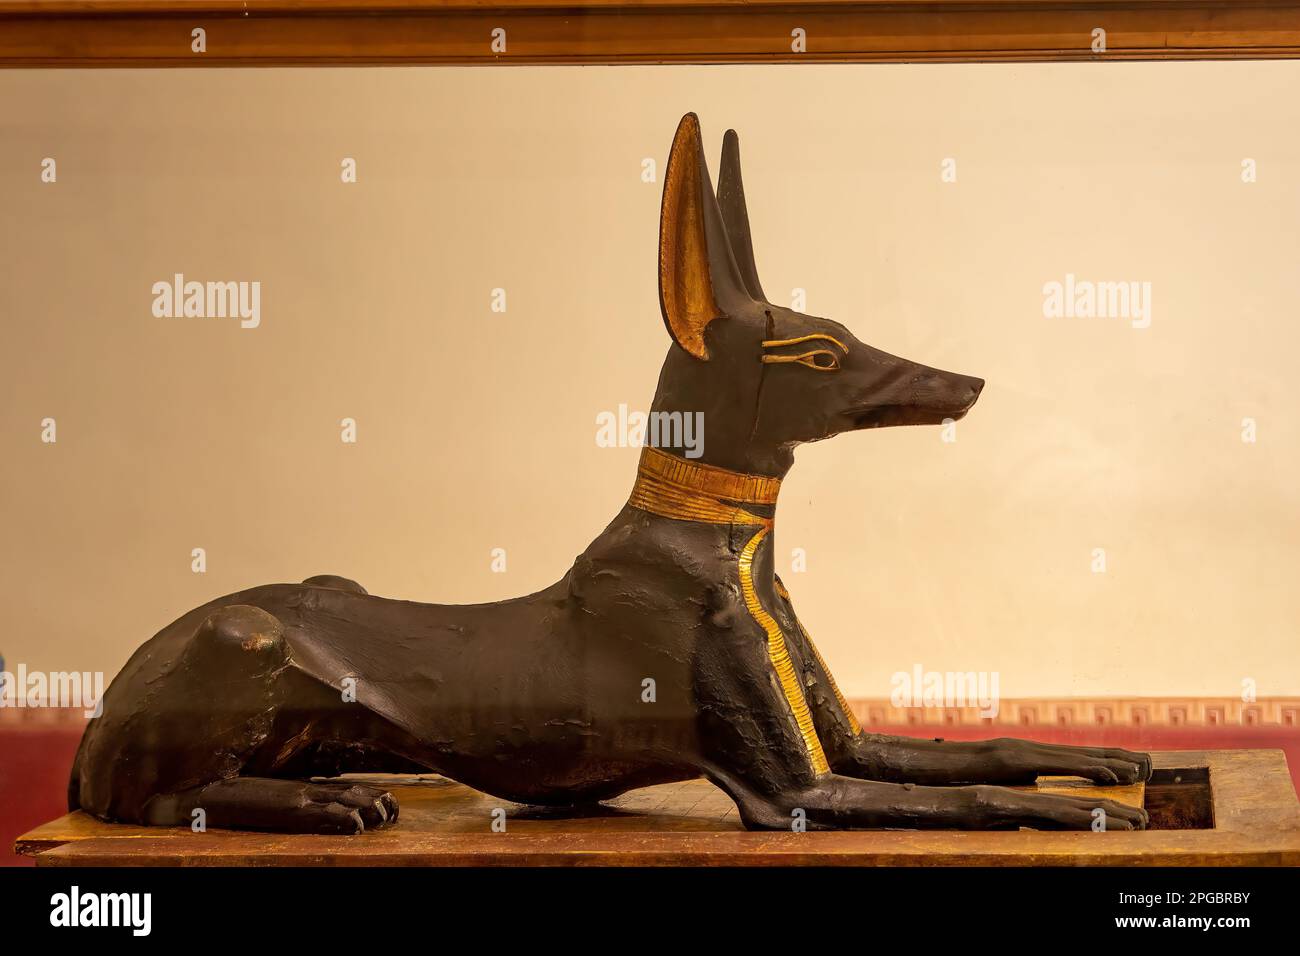 Statue of Anubis Jackal in Egyptian Museum, Cairo, Egypt Stock Photo